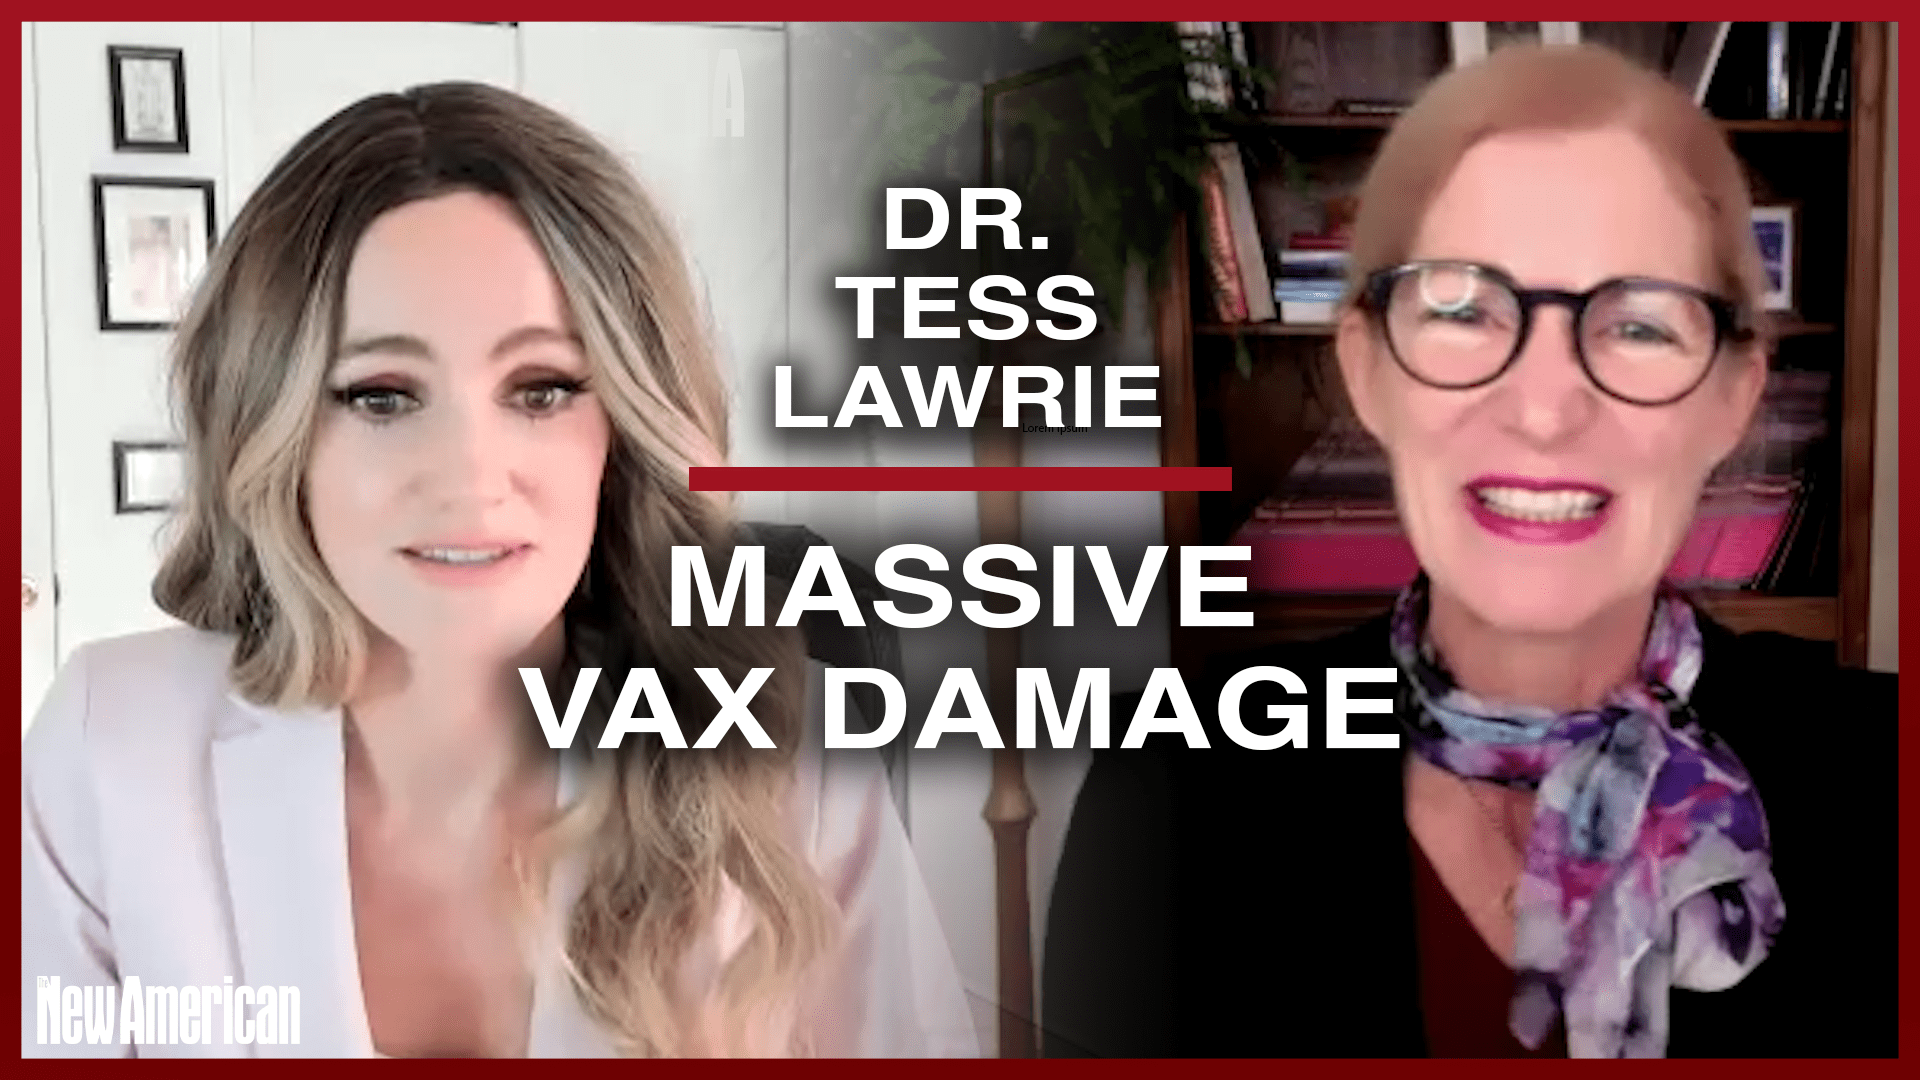 Massive Vax Damage and a Need For a Better Way  - The New American